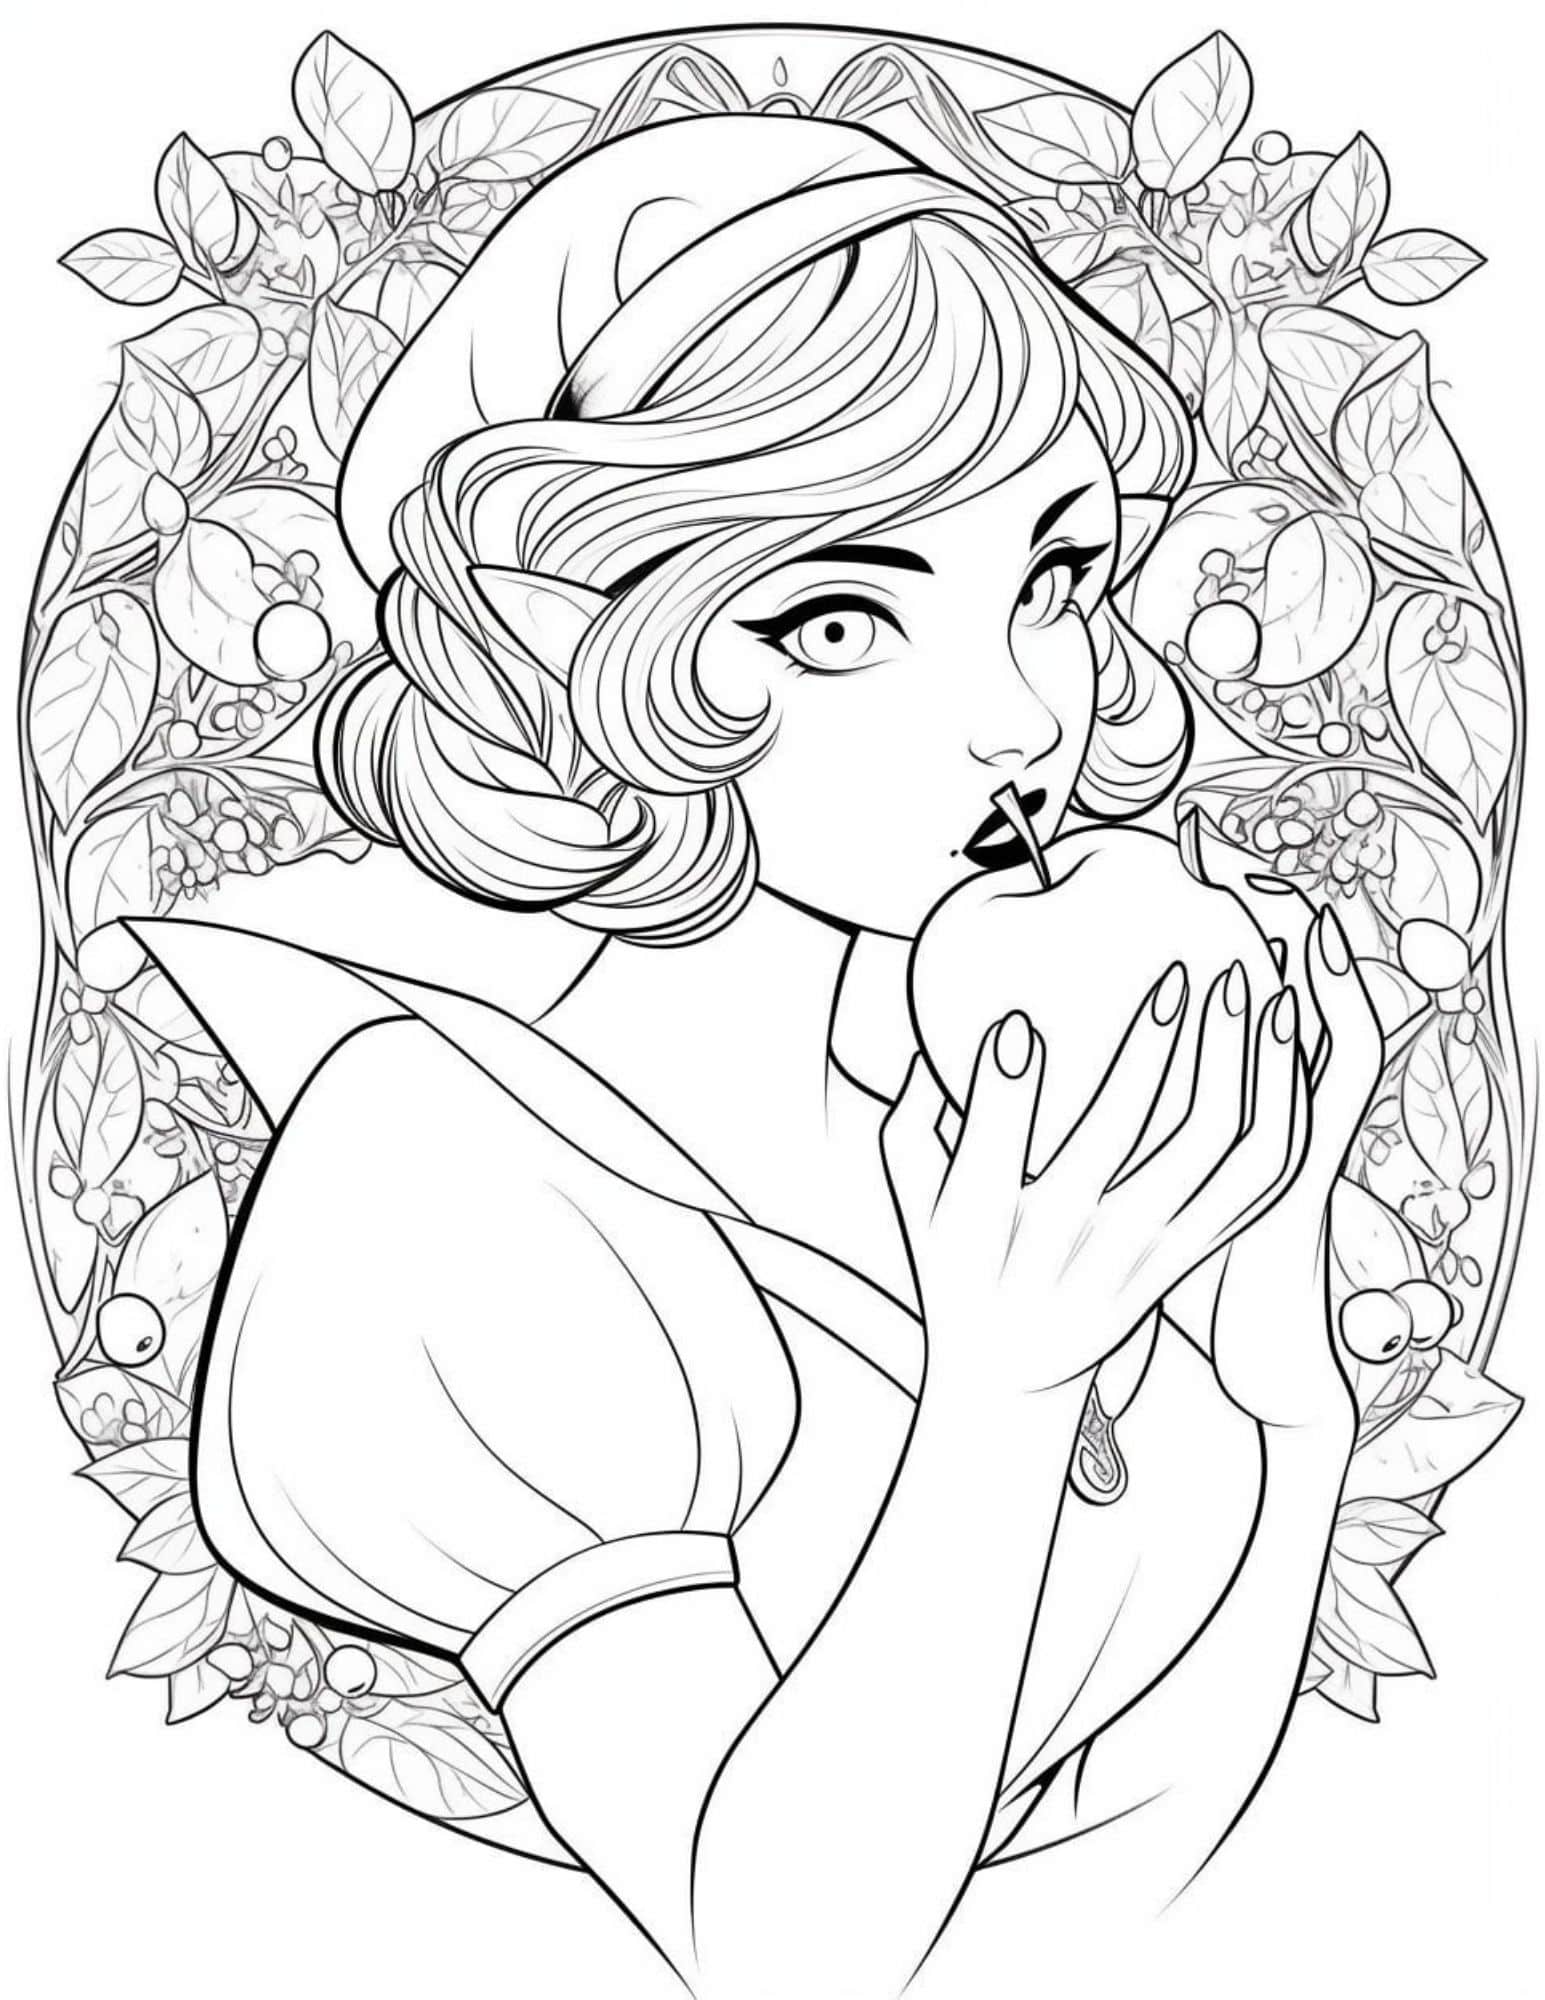 Printable Coloring Pages  Disney coloring pages, Princess coloring pages,  Disney princess coloring pages